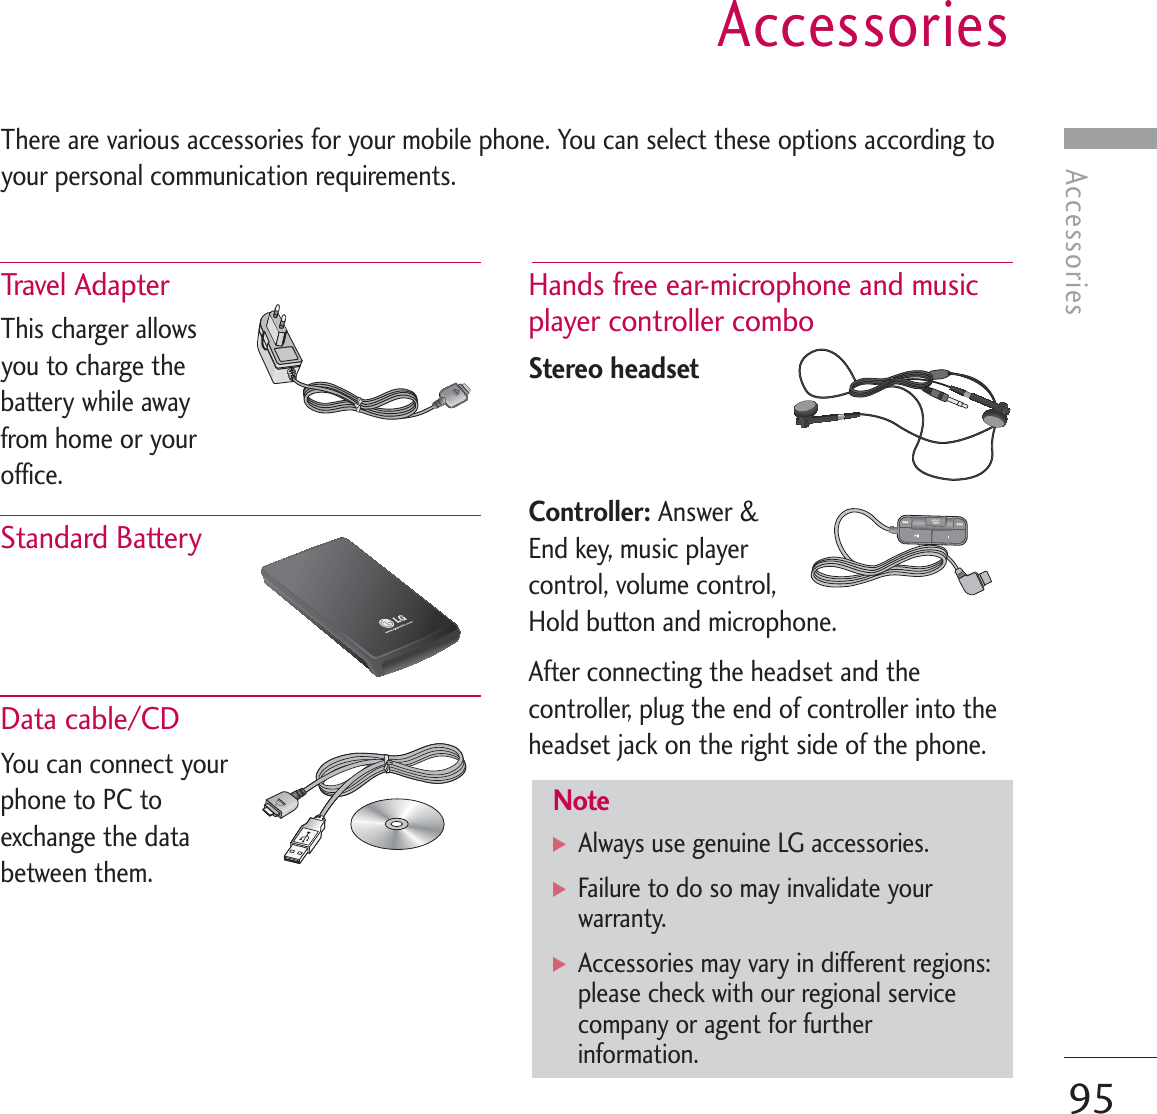 AccessoriesAccessories95There are various accessories for your mobile phone. You can select these options according toyour personal communication requirements.Trave l  Ad a pte r  This charger allowsyou to charge thebattery while awayfrom home or youroffice.Standard Battery Data cable/CD You can connect yourphone to PC toexchange the databetween them. Hands free ear-microphone and musicplayer controller combo Stereo headsetController: Answer &amp;End key, music playercontrol, volume control,Hold button and microphone.After connecting the headset and thecontroller, plug the end of controller into theheadset jack on the right side of the phone.Note] Always use genuine LG accessories.] Failure to do so may invalidate yourwarranty.] Accessories may vary in different regions:please check with our regional servicecompany or agent for furtherinformation.